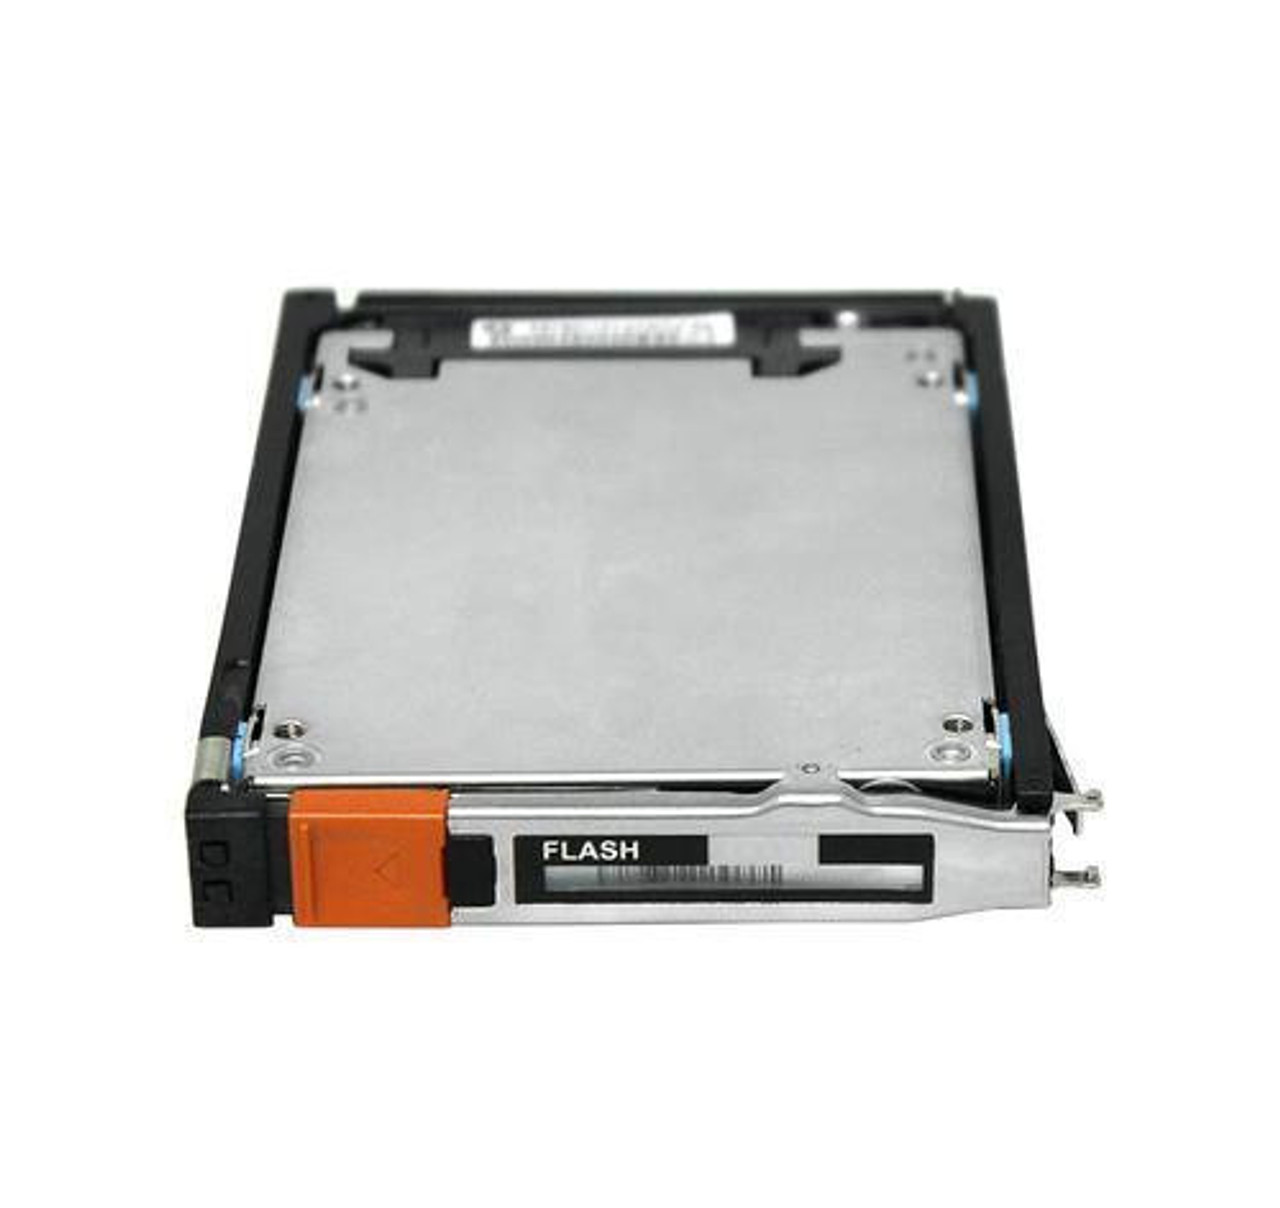 FLVX2S6F100NU | EMC | 100GB Fast Cache Flash 2.5-inch Internal Solid State Drive (SSD) for VNX 25 x 2.5 DPE/DAE